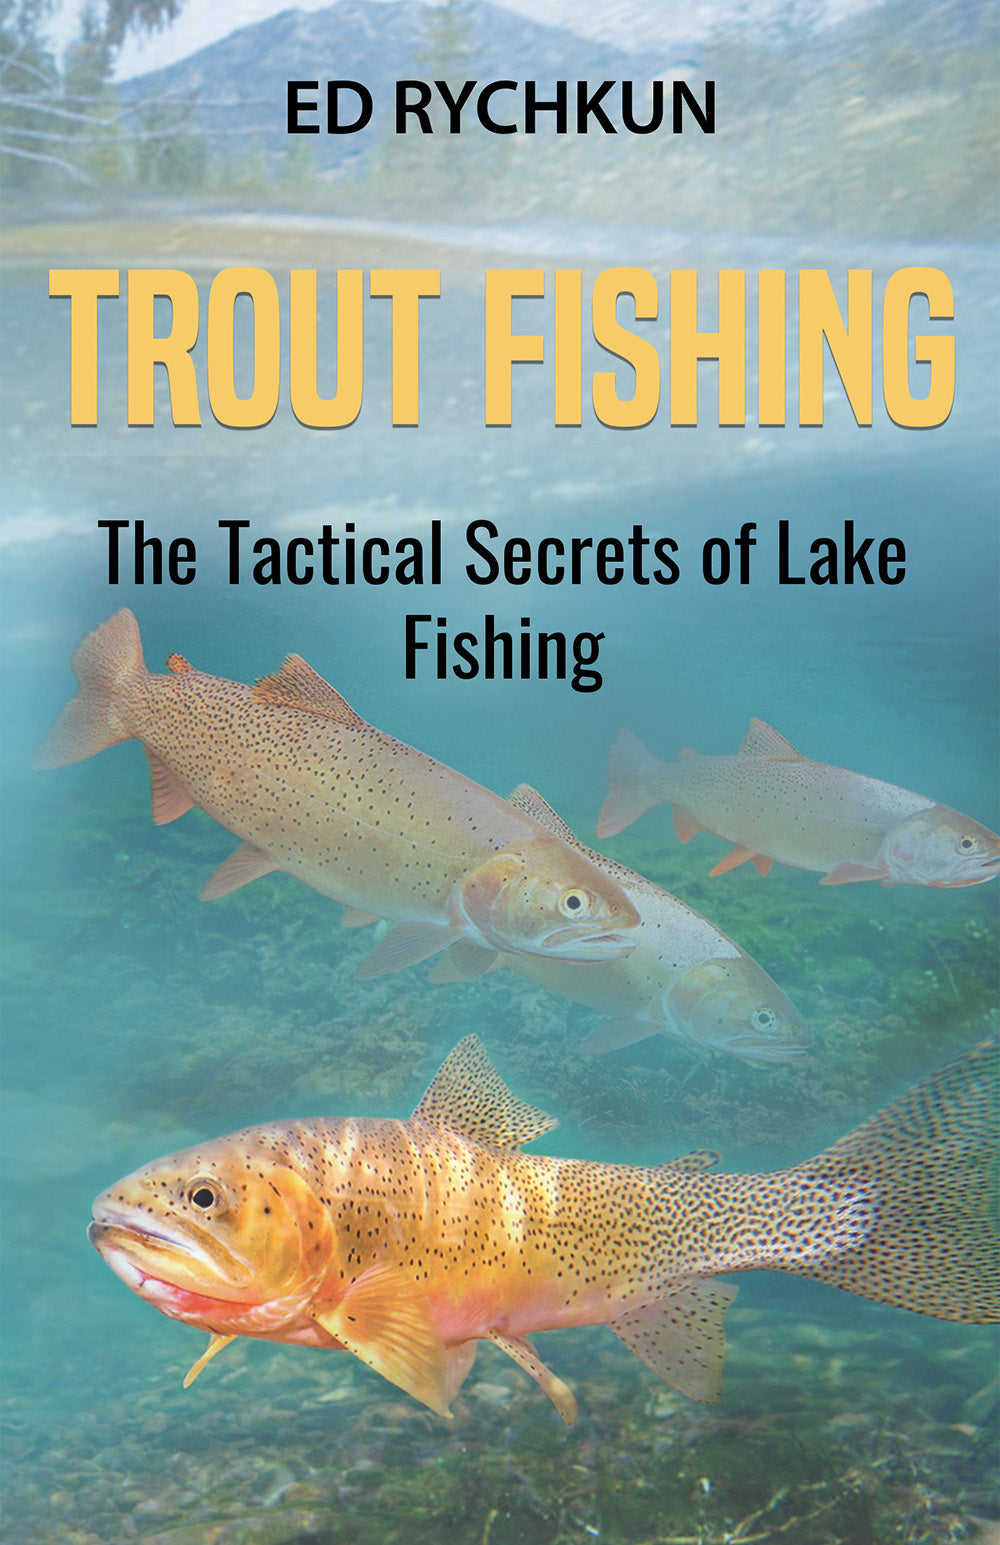 Trout Fishing: the tactical secrets of lake fishing